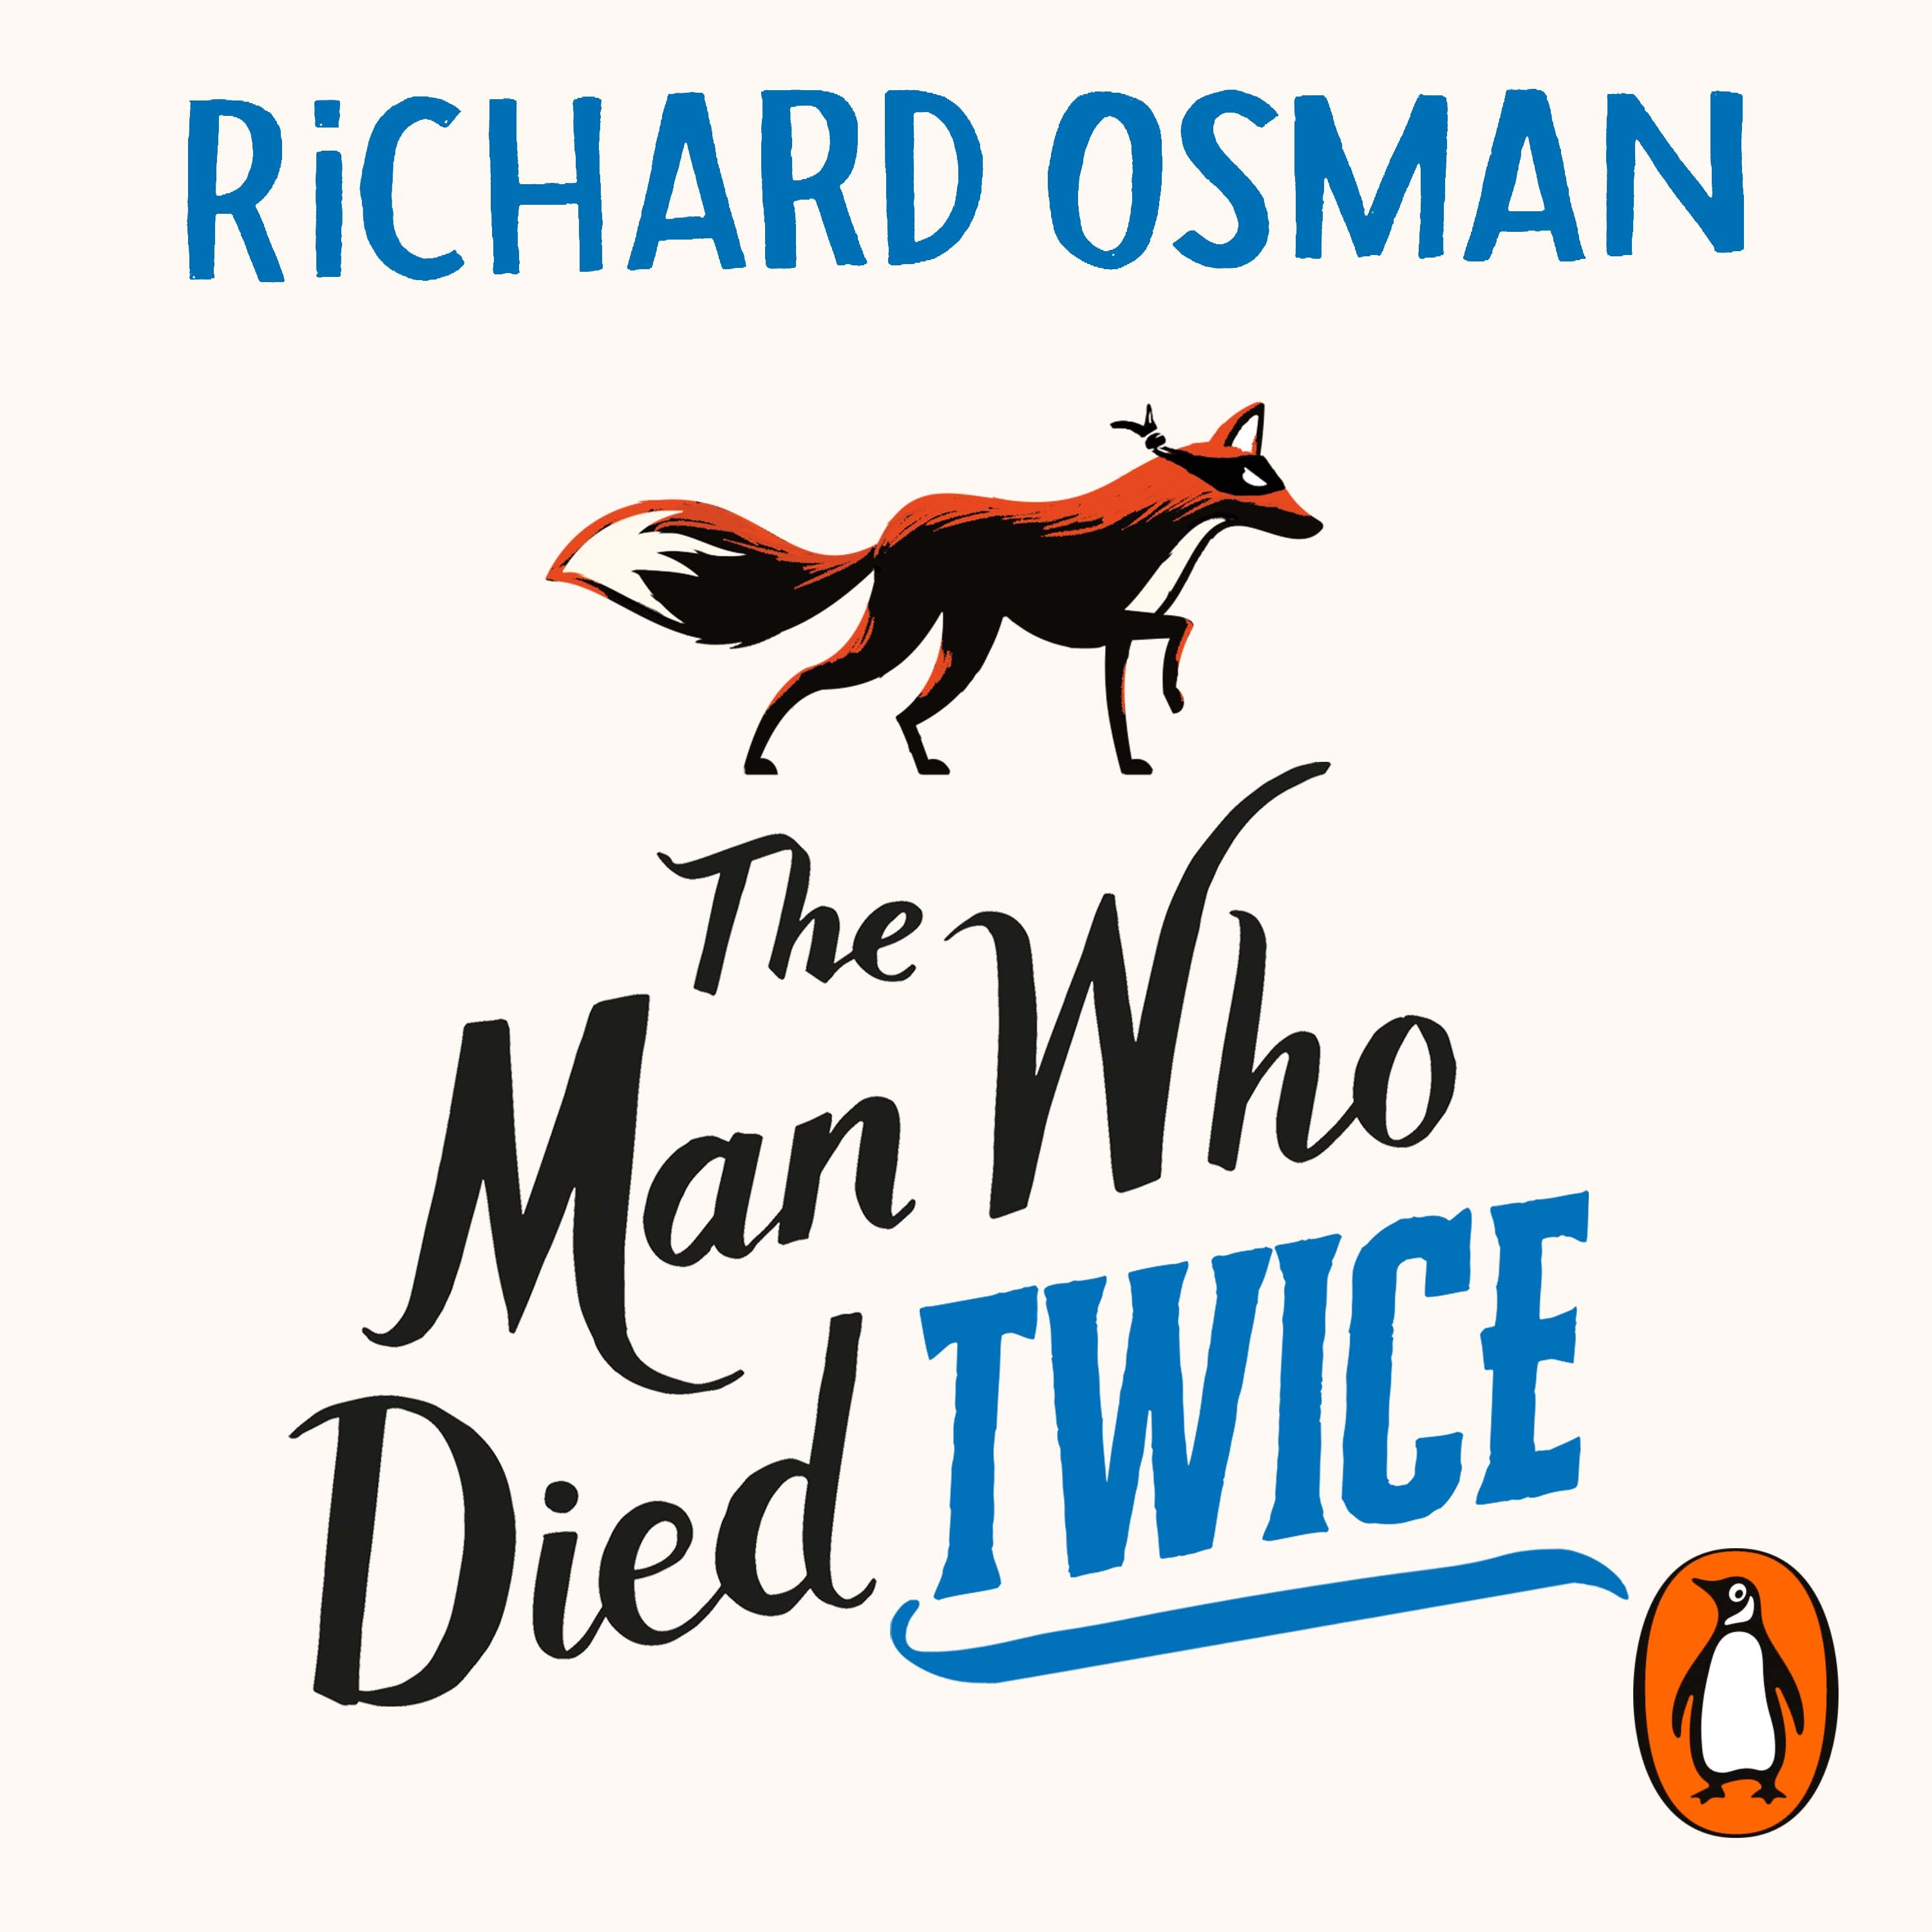 Audiobook image for The Man Who Died Twice: Cream background with Richard Osman's name in blue at the top. An illustrated fox is below it, and the title stacked below that in black and blue handwritten font.